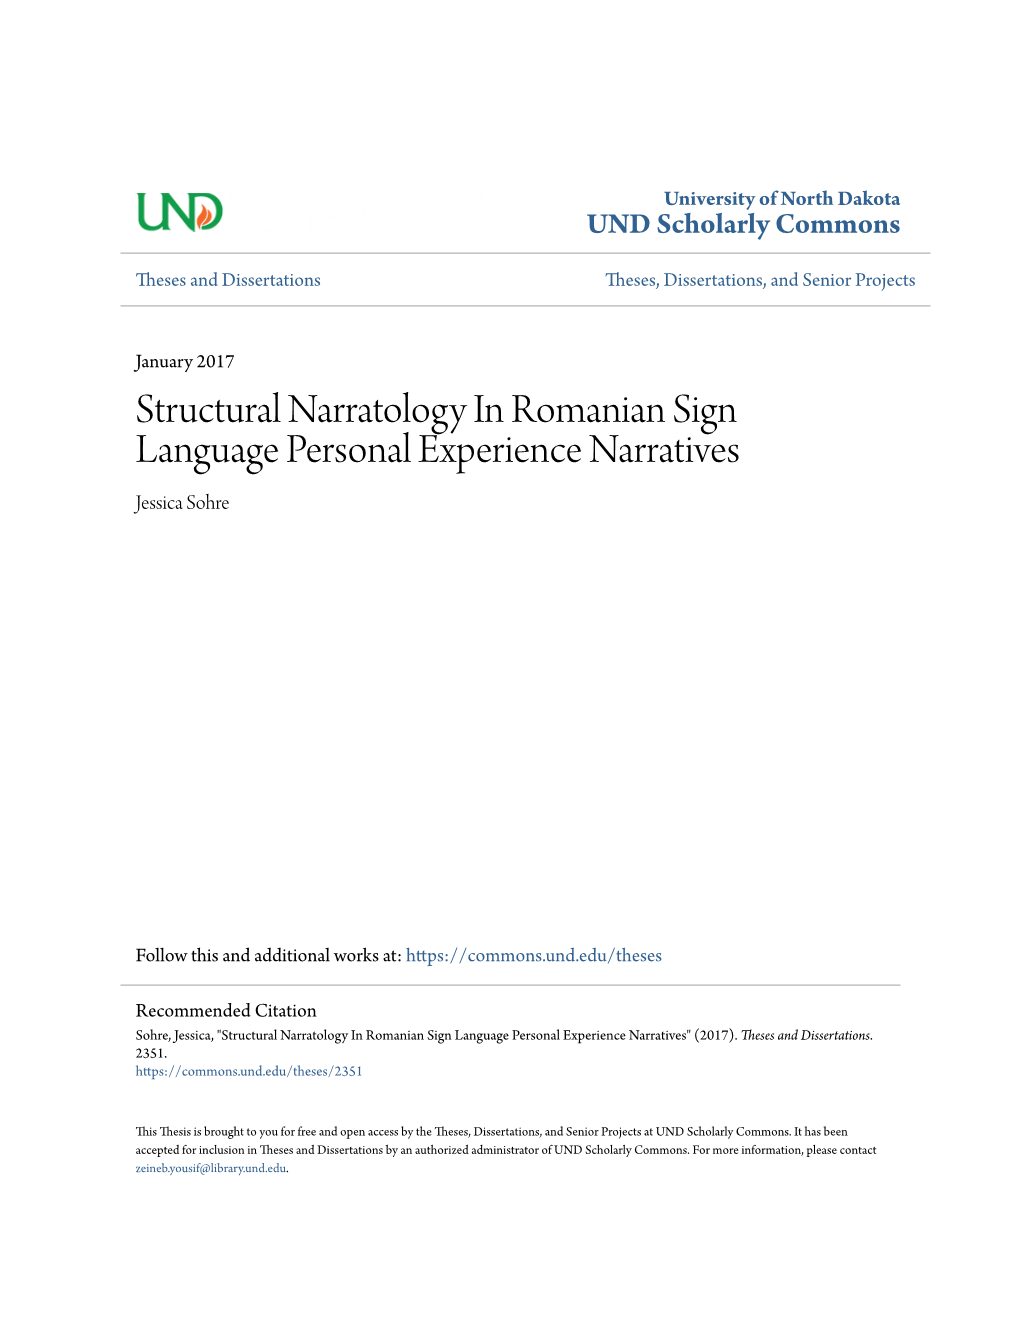 Structural Narratology in Romanian Sign Language Personal Experience Narratives Jessica Sohre